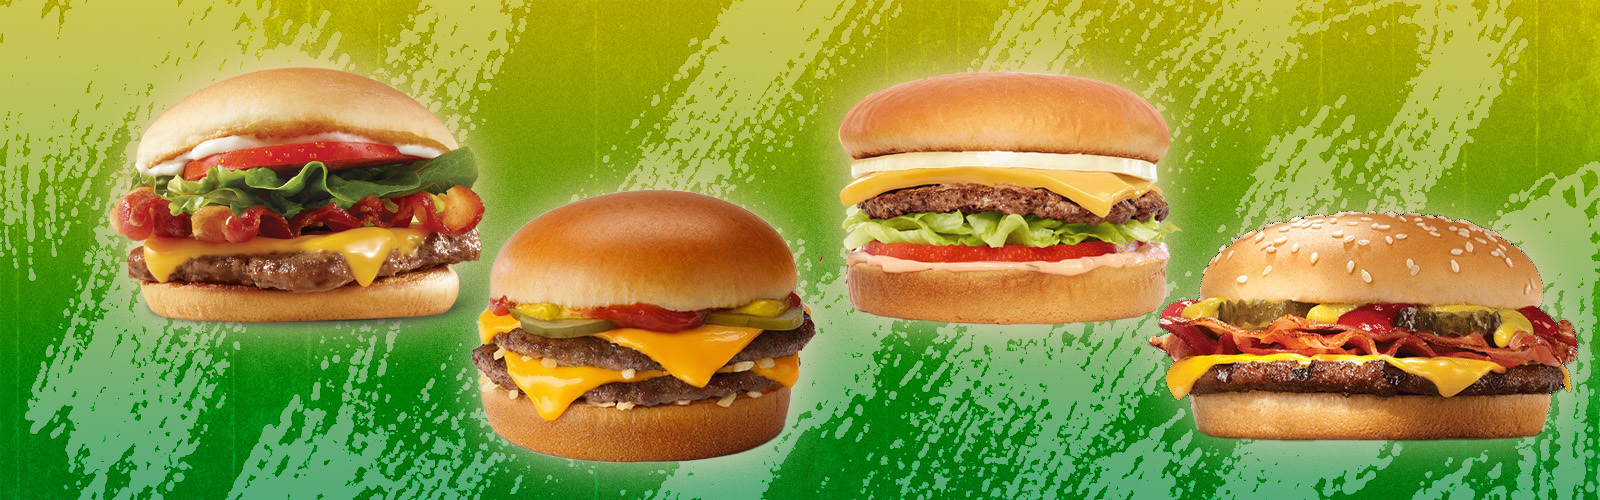 The Best Fast Food Cheeseburgers Under $5(1600x5000